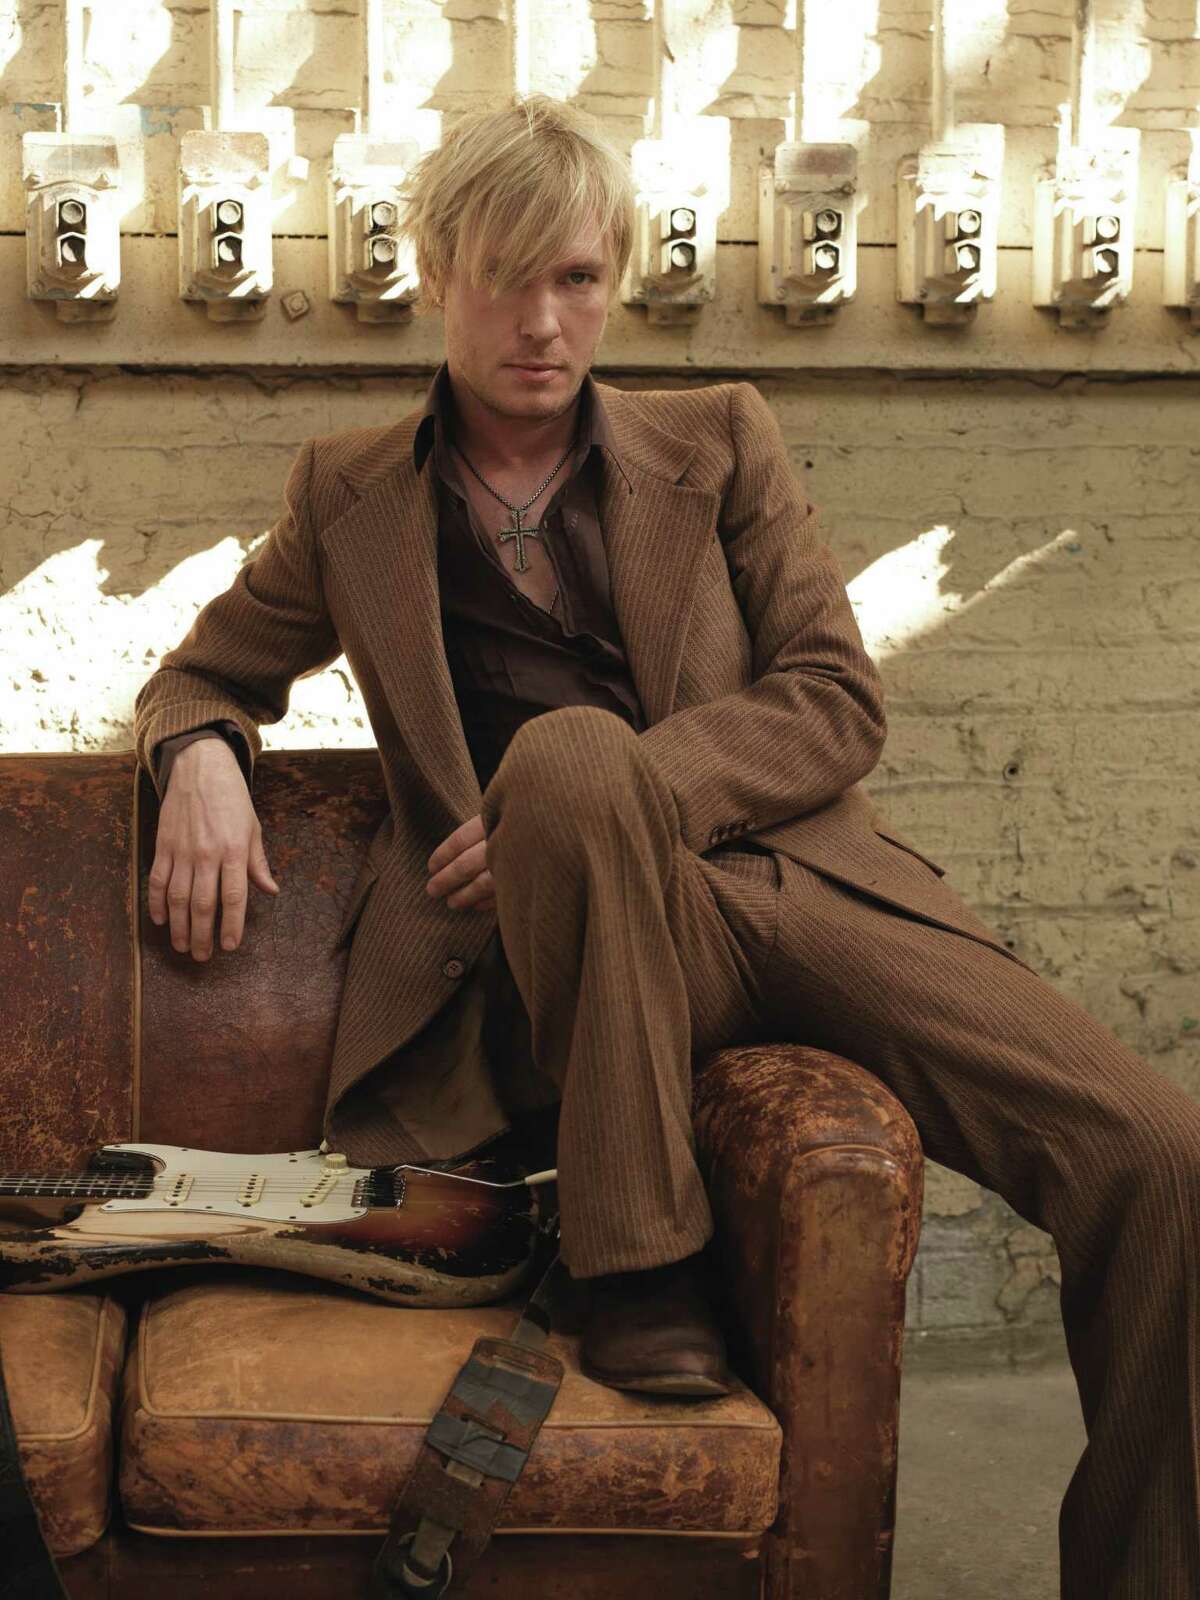 Kenny Wayne Shepherd performs at 7:30 p.m. Friday at Upstate Concert Hall in Clifton Park. Click here for more information. (Mark Seliger)